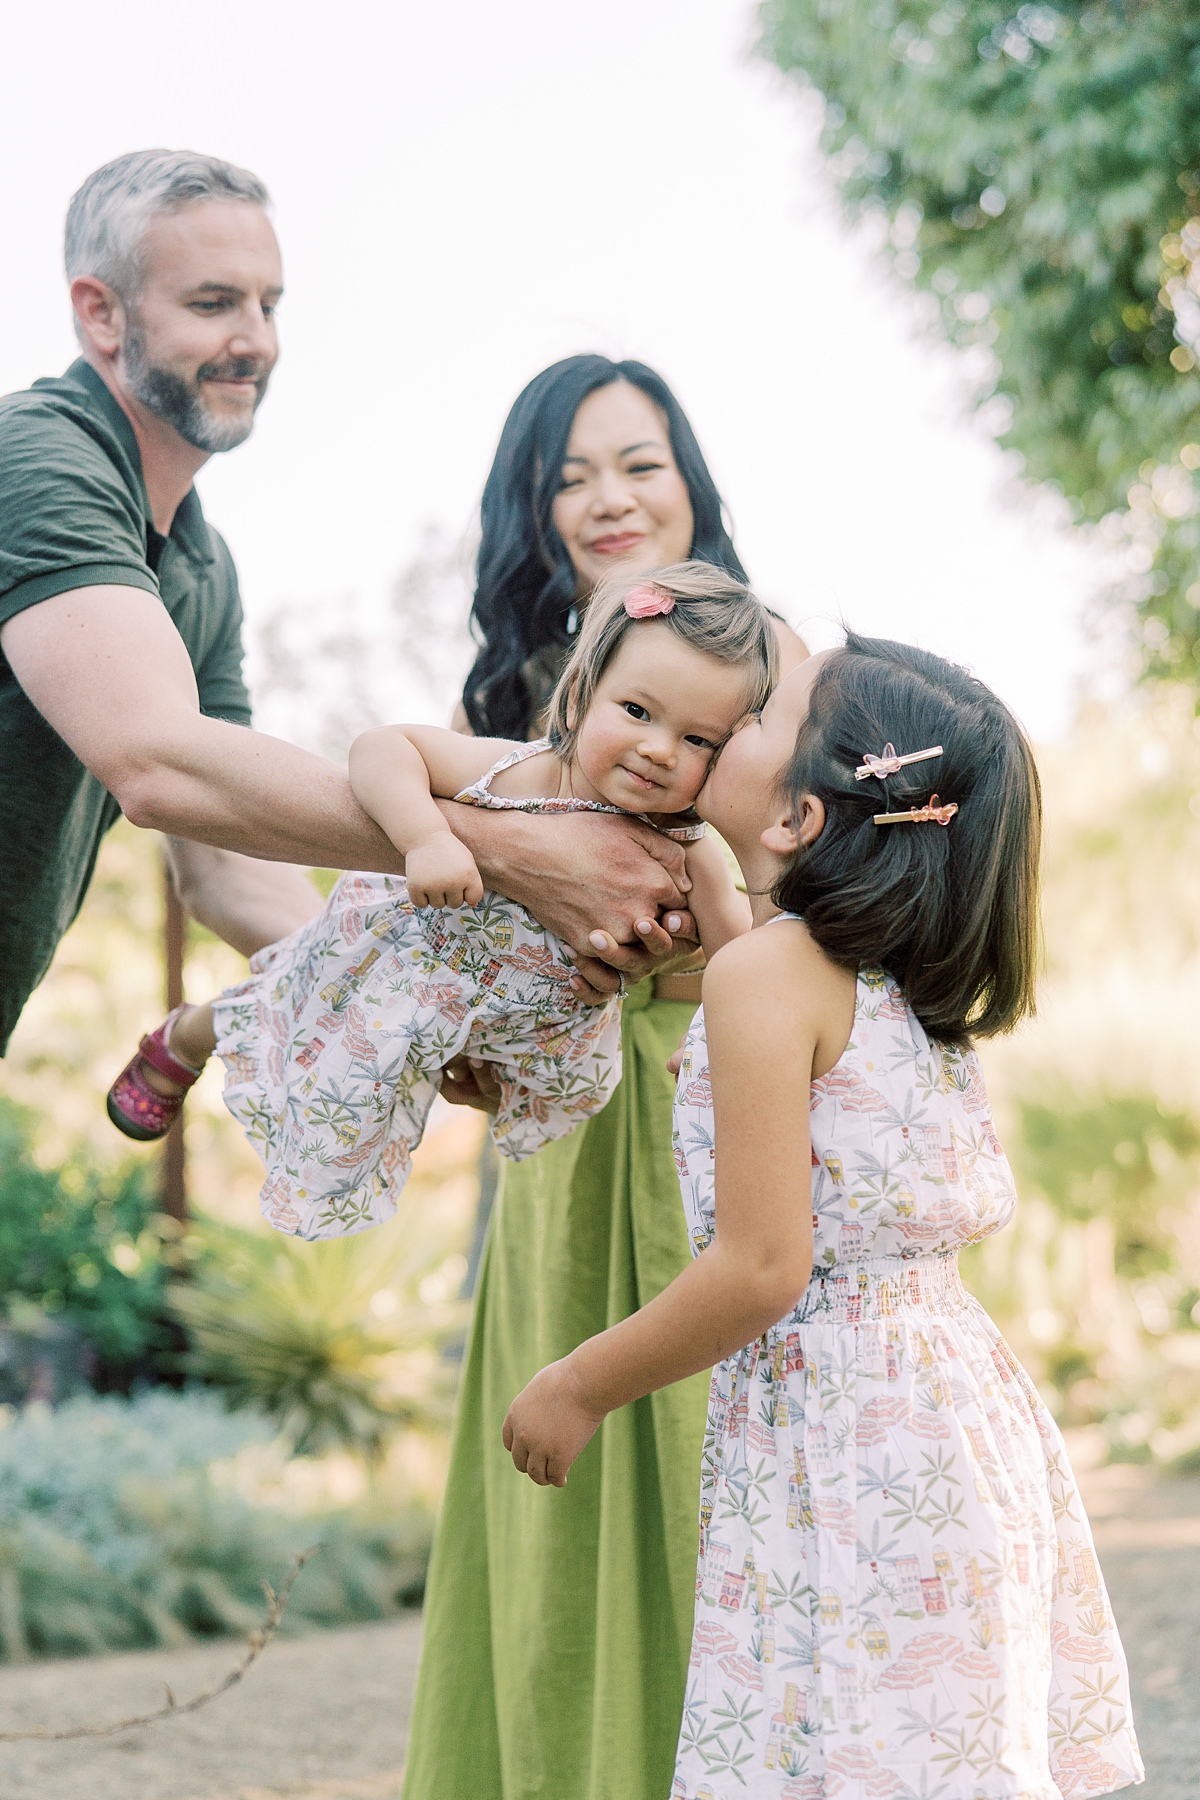 Walnut Creek family photography session in a cactus garden